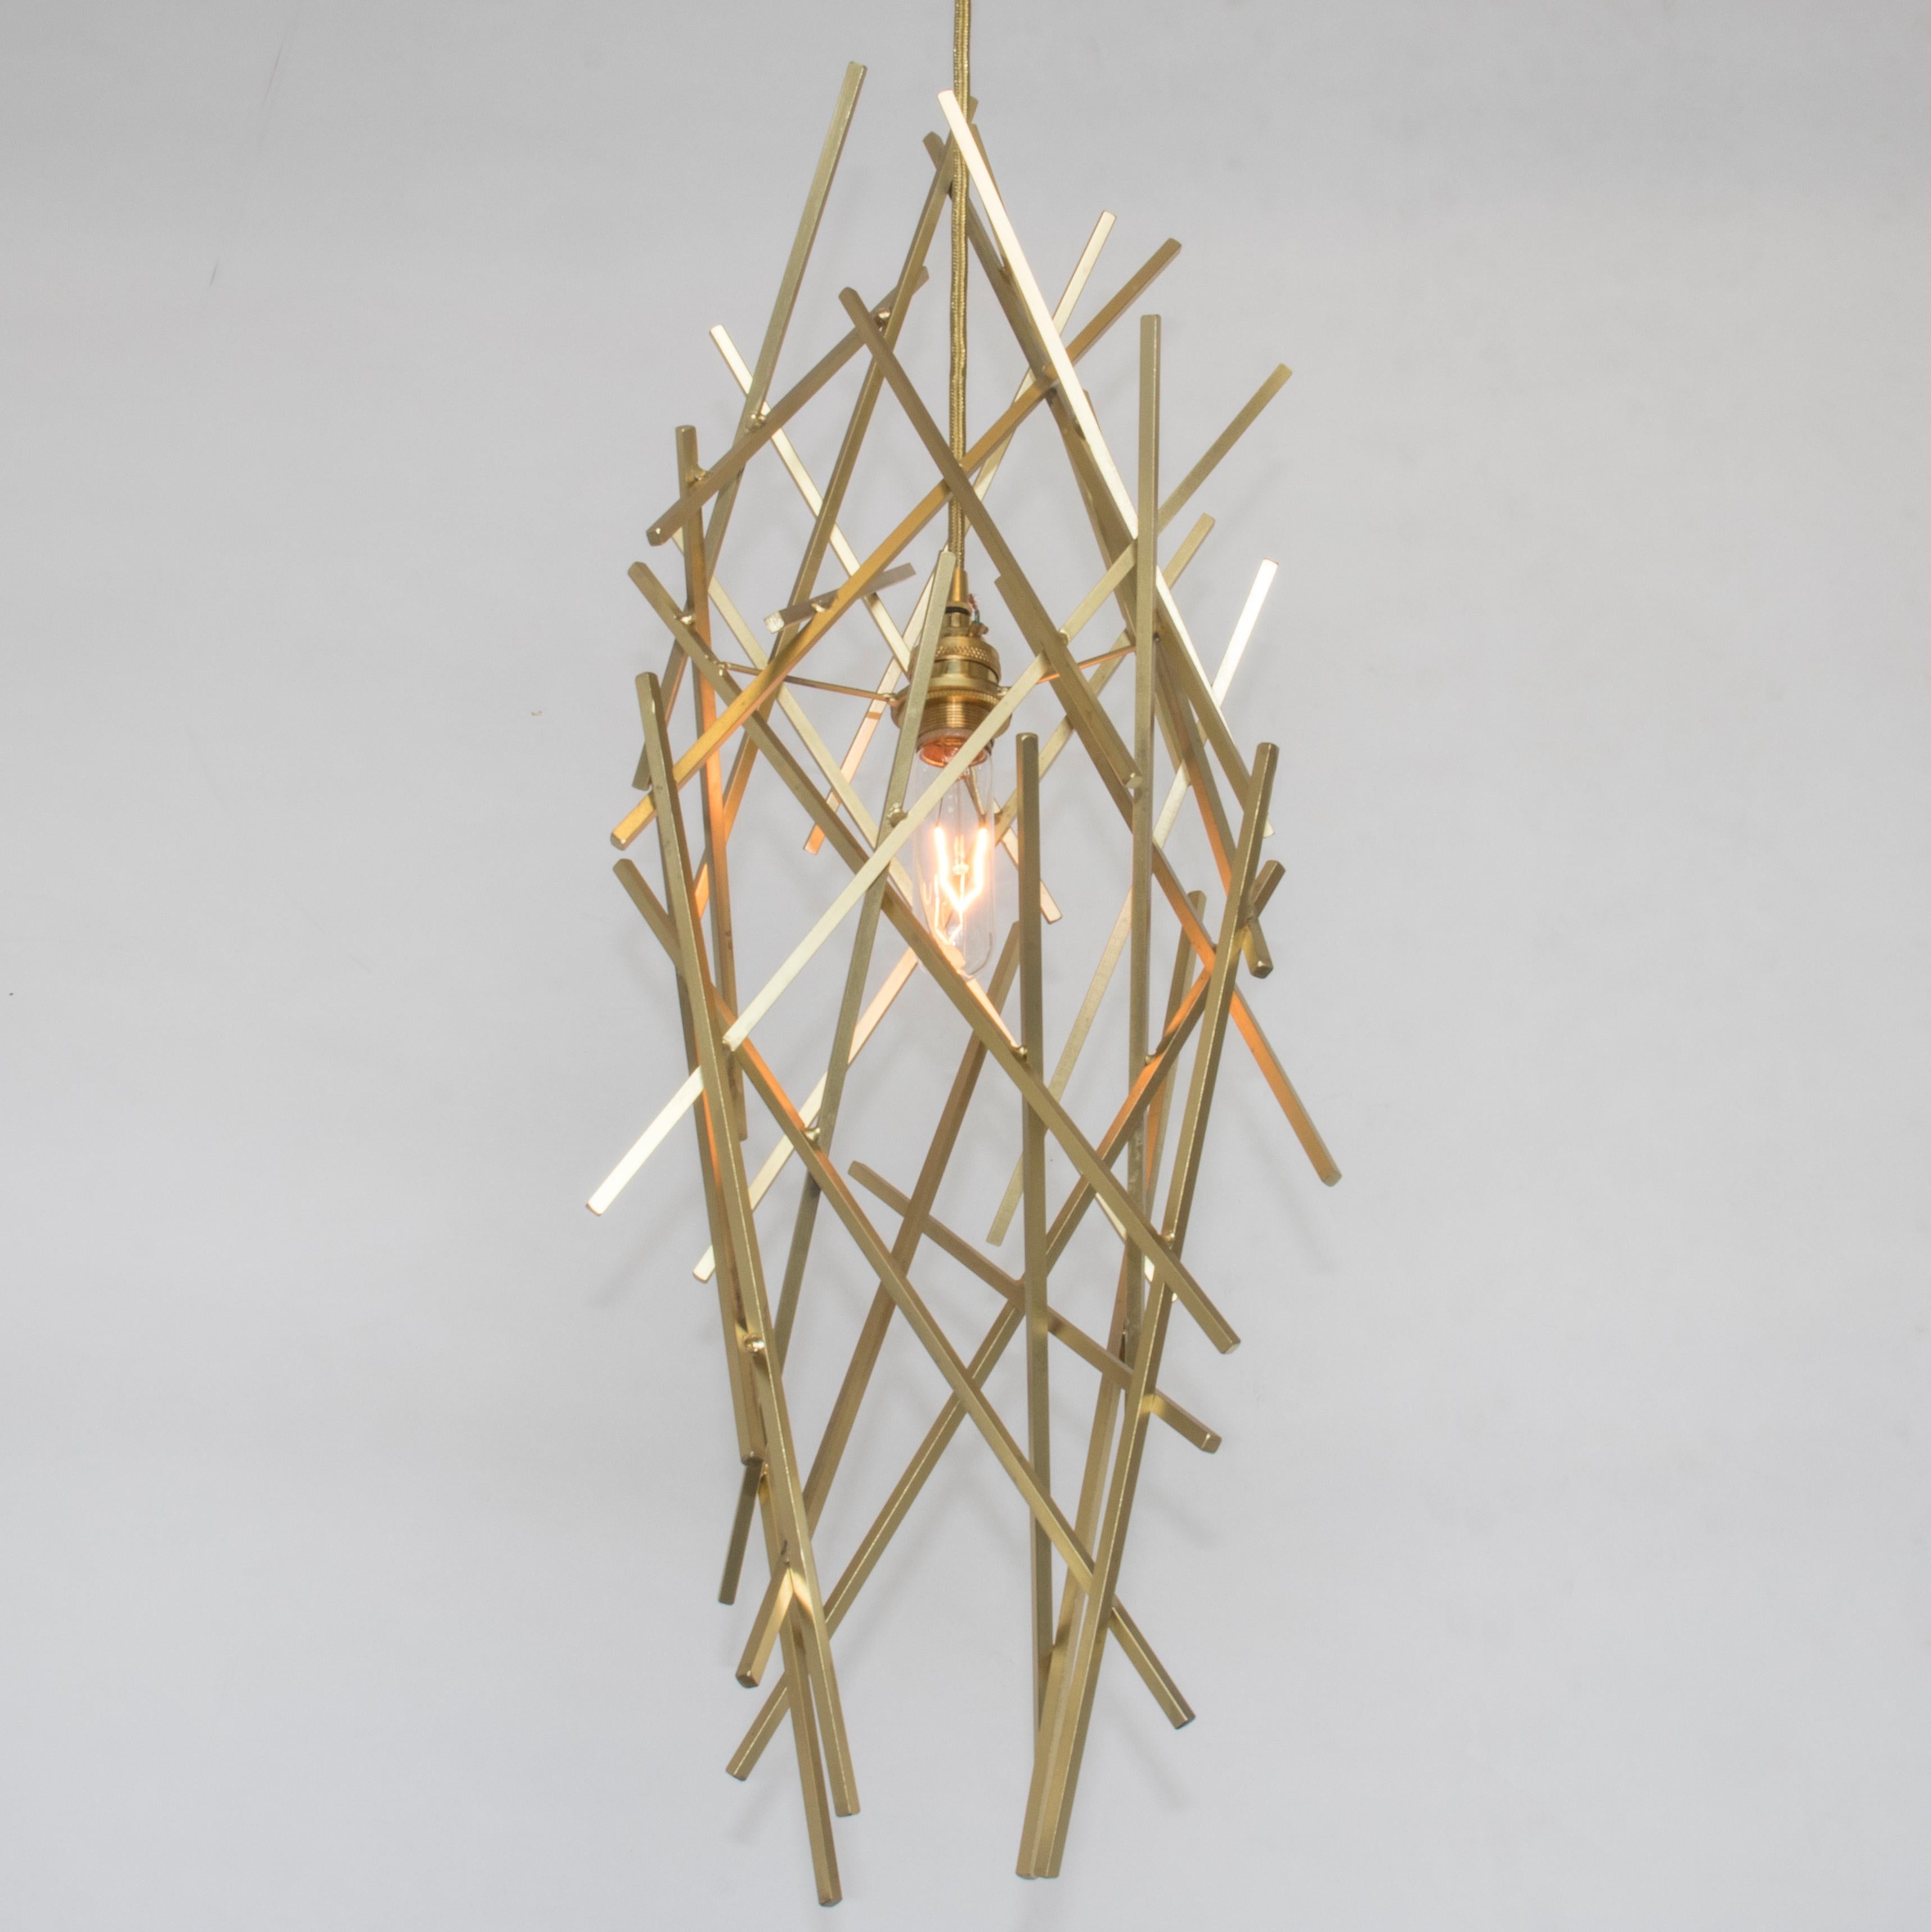 The CRISS-CROSS Pendant is composed of artistically welded steel square rod. Each piece is uniquely handmade and while similar, no two fixtures are alike.

Shown in Satin Brass with premium Brass socket and woven cord. 

Dimensions: 9